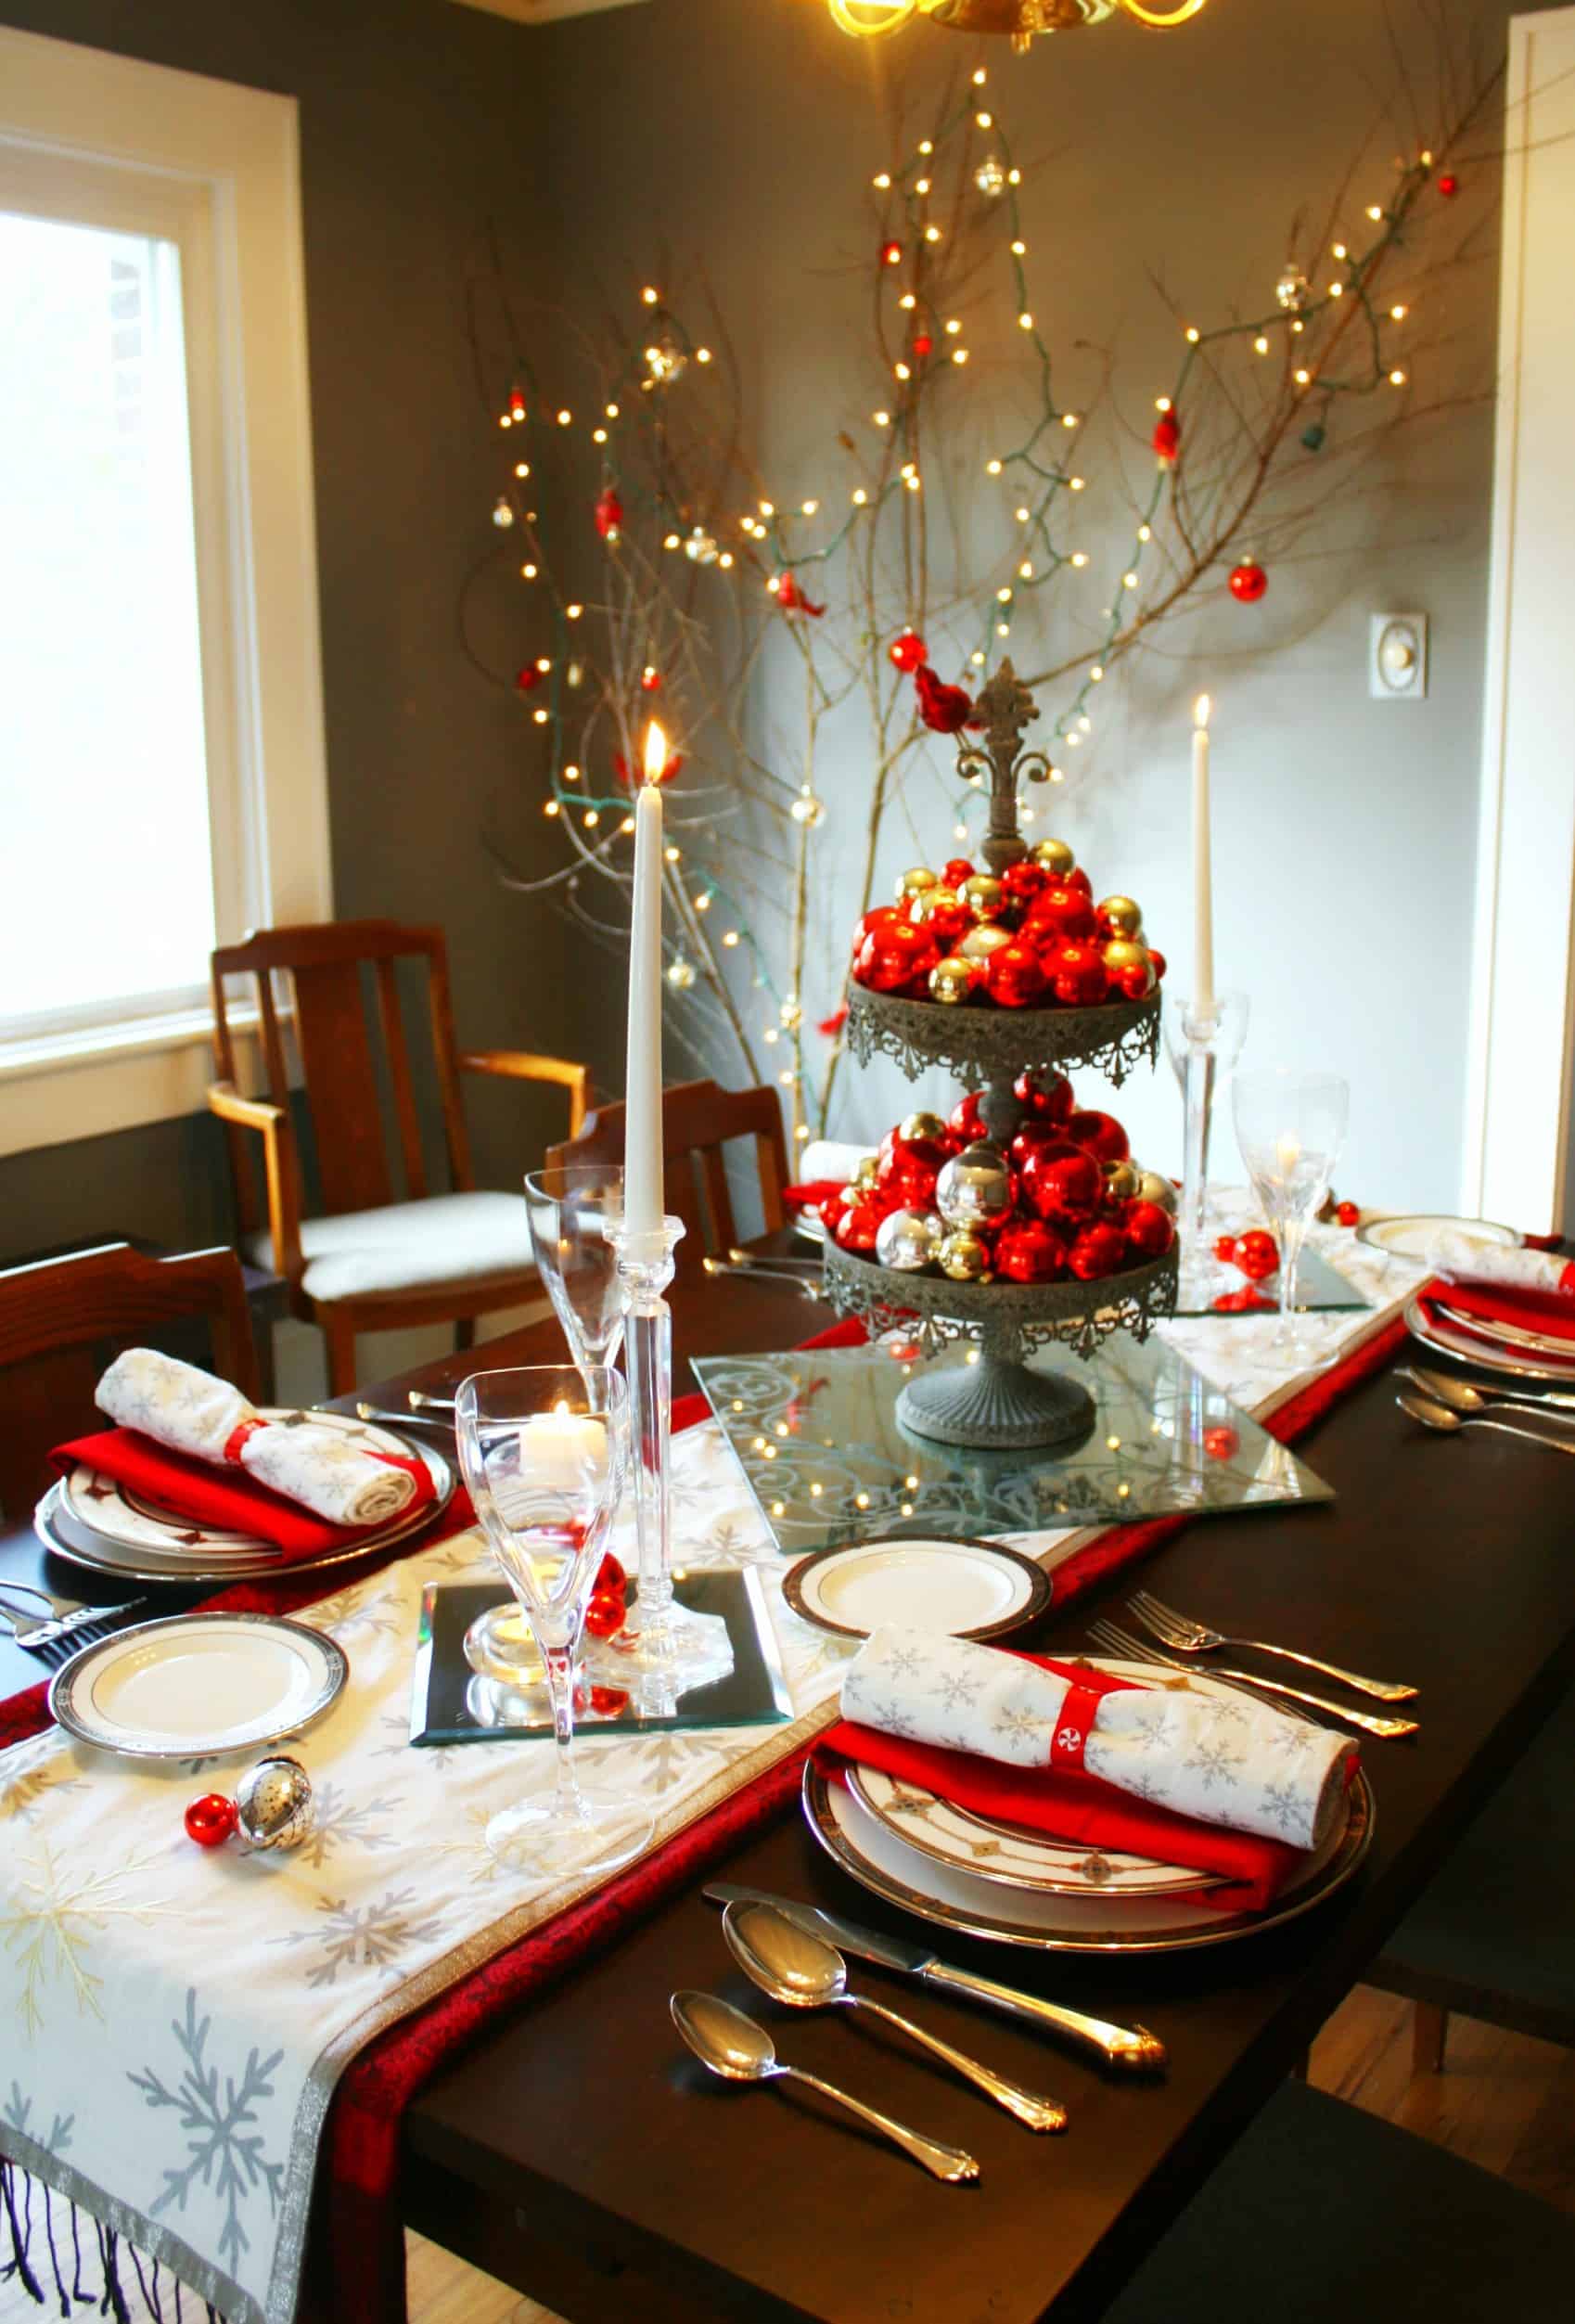 decoration ideas for christmas dinner table decorating dining room decor decorations holiday table ideas contemporary house designs pictures ideal interior design ideas bedroom designer ho